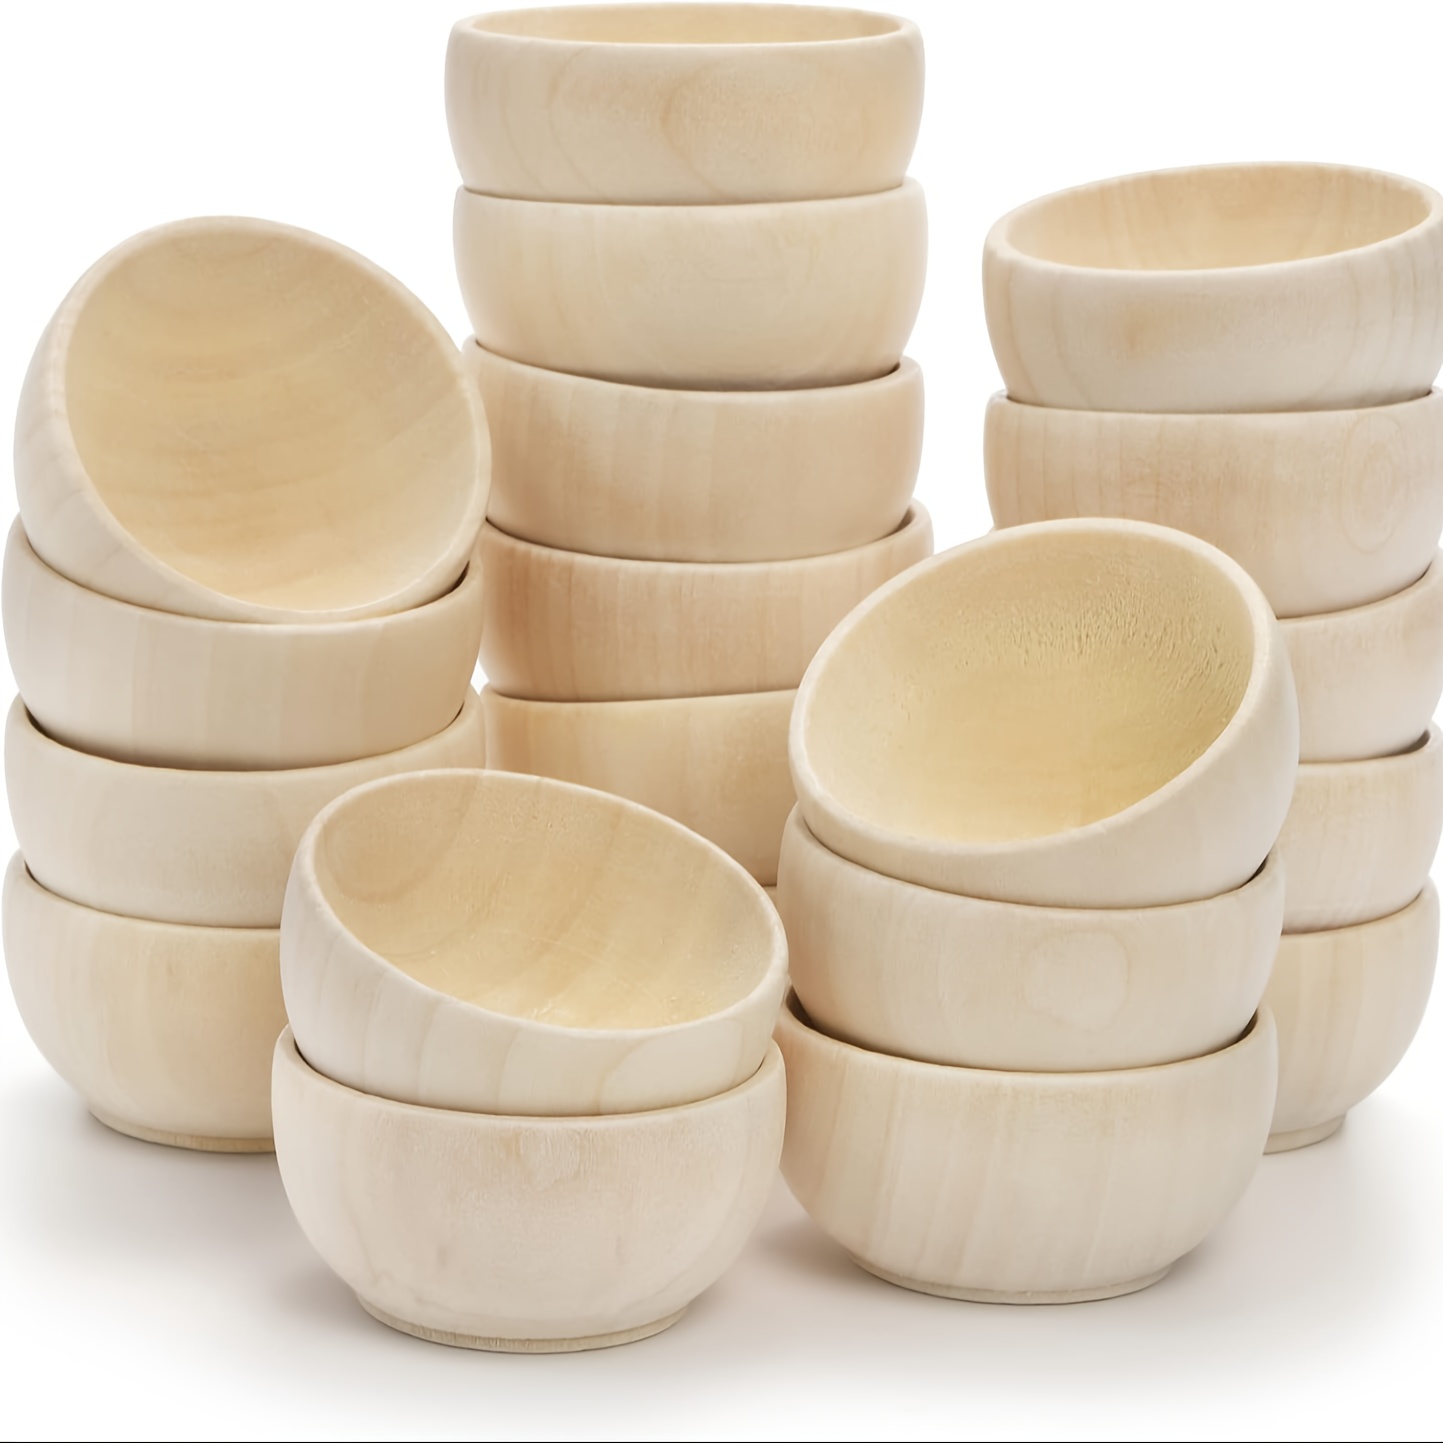 

5/8pc Set Unfinished Wooden Bowls - Diy Craft & Jewelry Making, Mini Round Sauce/condiment/salad/nut Dip Dishes, Unpainted For Painting, Home Decor & Portable Tableware